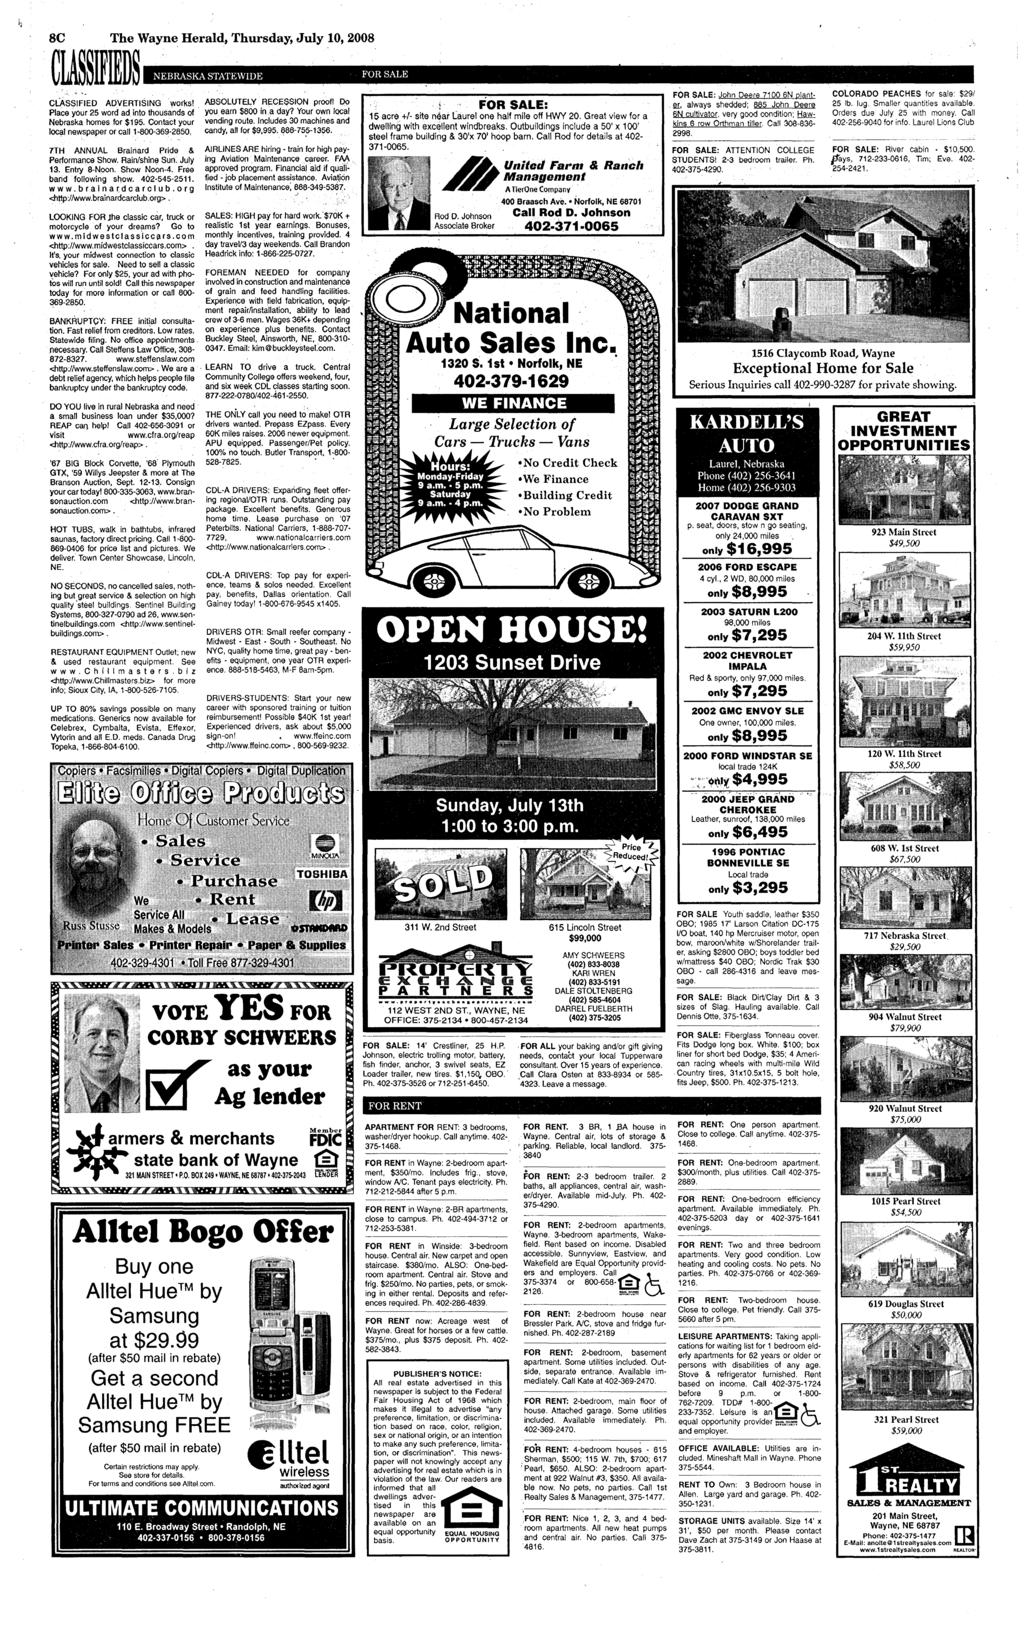 8e The Wayne Herald, Thursday, July 10, 2008 ~W~WffiD~ CLASSIFIED ADVERTISING works! Place your 25 word ad into thousands of. Nebraska homes for $195.